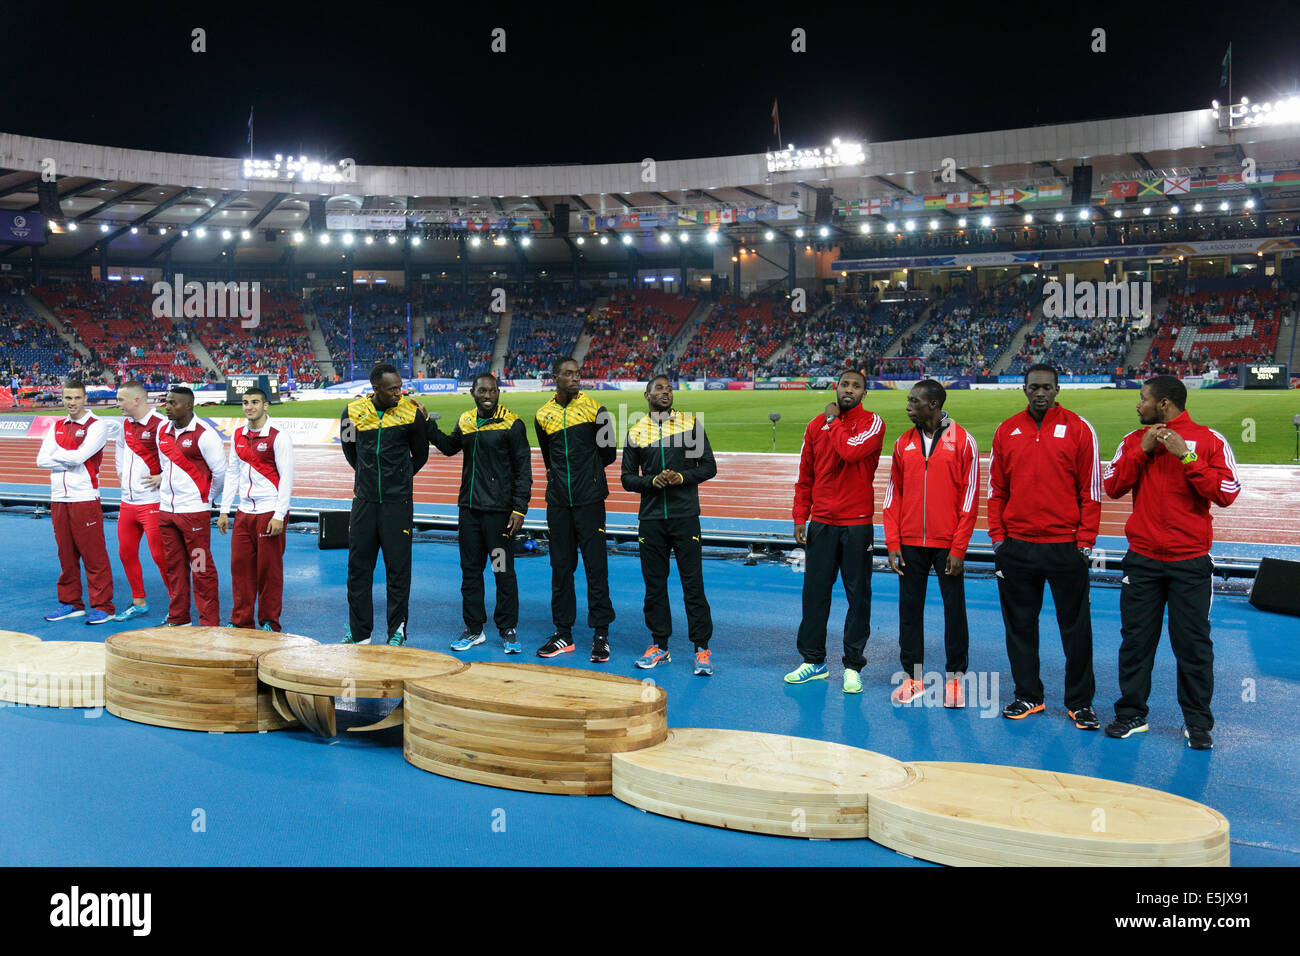 Hampden Park, Glasgow, Scotland, UK, Saturday, 2nd August, 2014. Glasgow 2014 Commonwealth Games, Men's 4 x 100m Relay, Medal Ceremony. Left to Right. England Silver, Jamaica Gold, Trinidad and Tobago Bronze Stock Photo